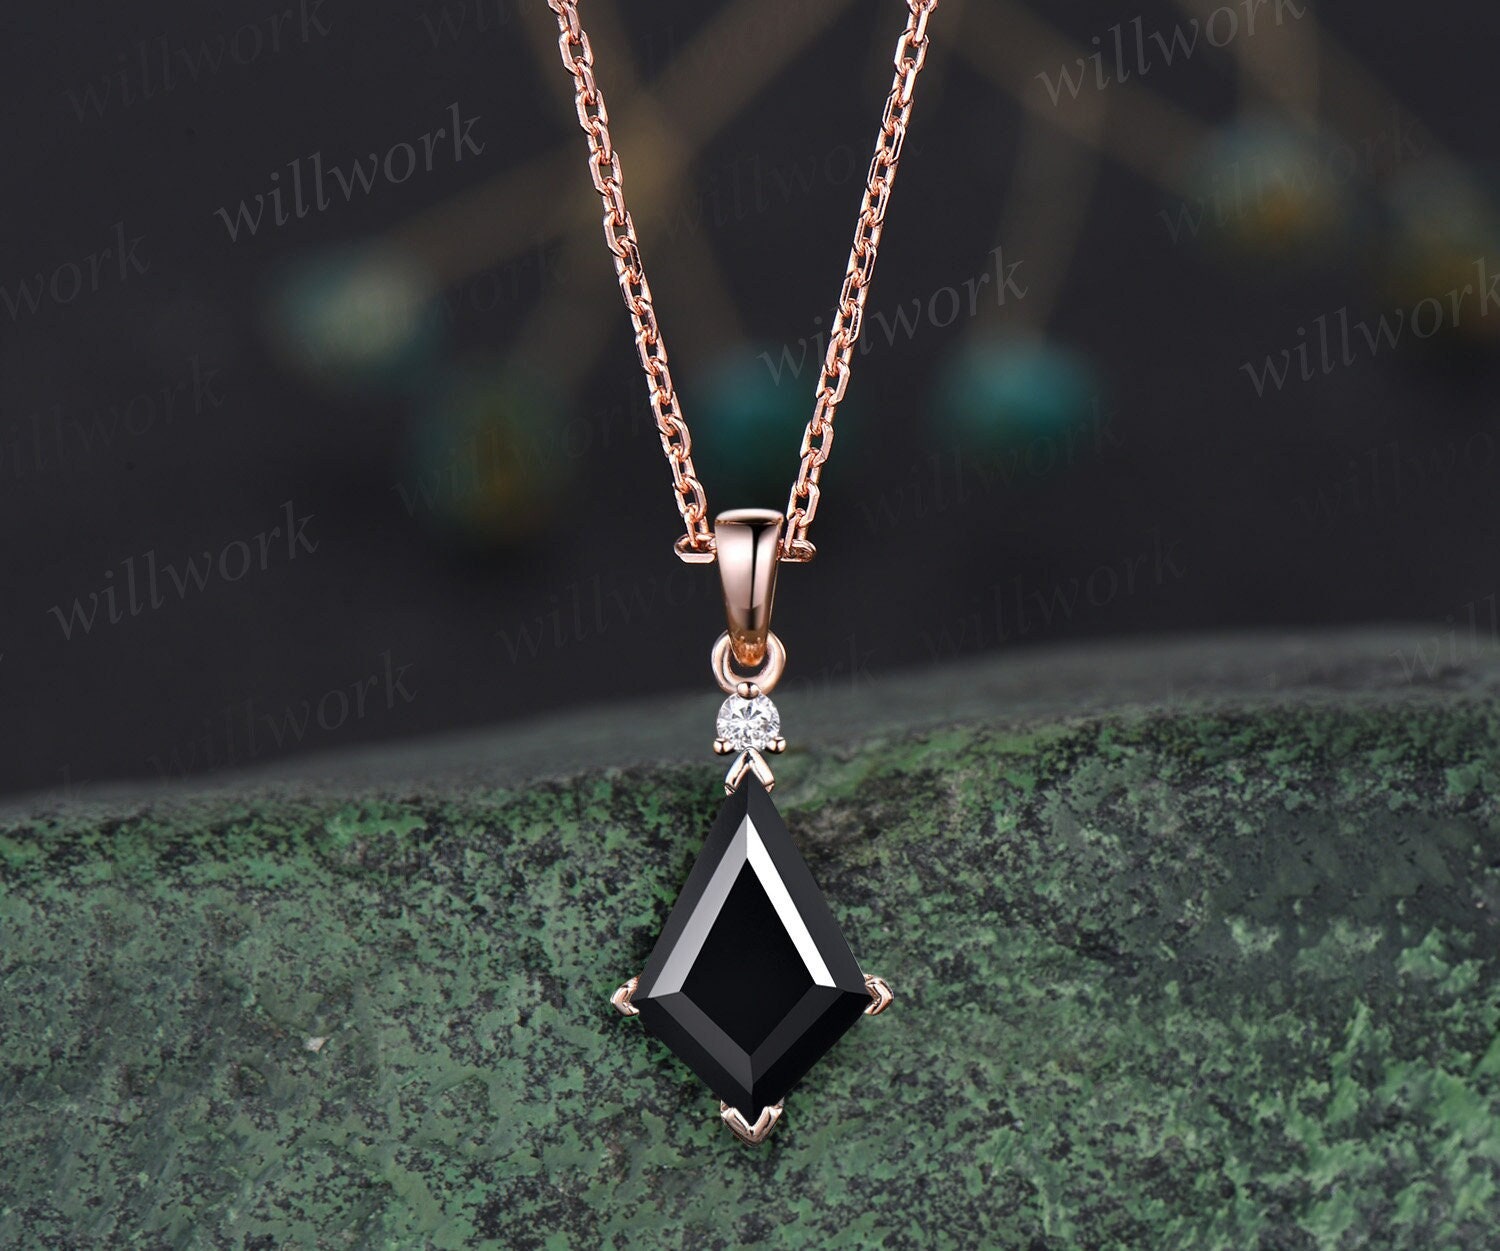 SUMANYA Square shape black stone necklace for men or boys, Stylish necklace  for youth. Alloy Price in India - Buy SUMANYA Square shape black stone  necklace for men or boys, Stylish necklace